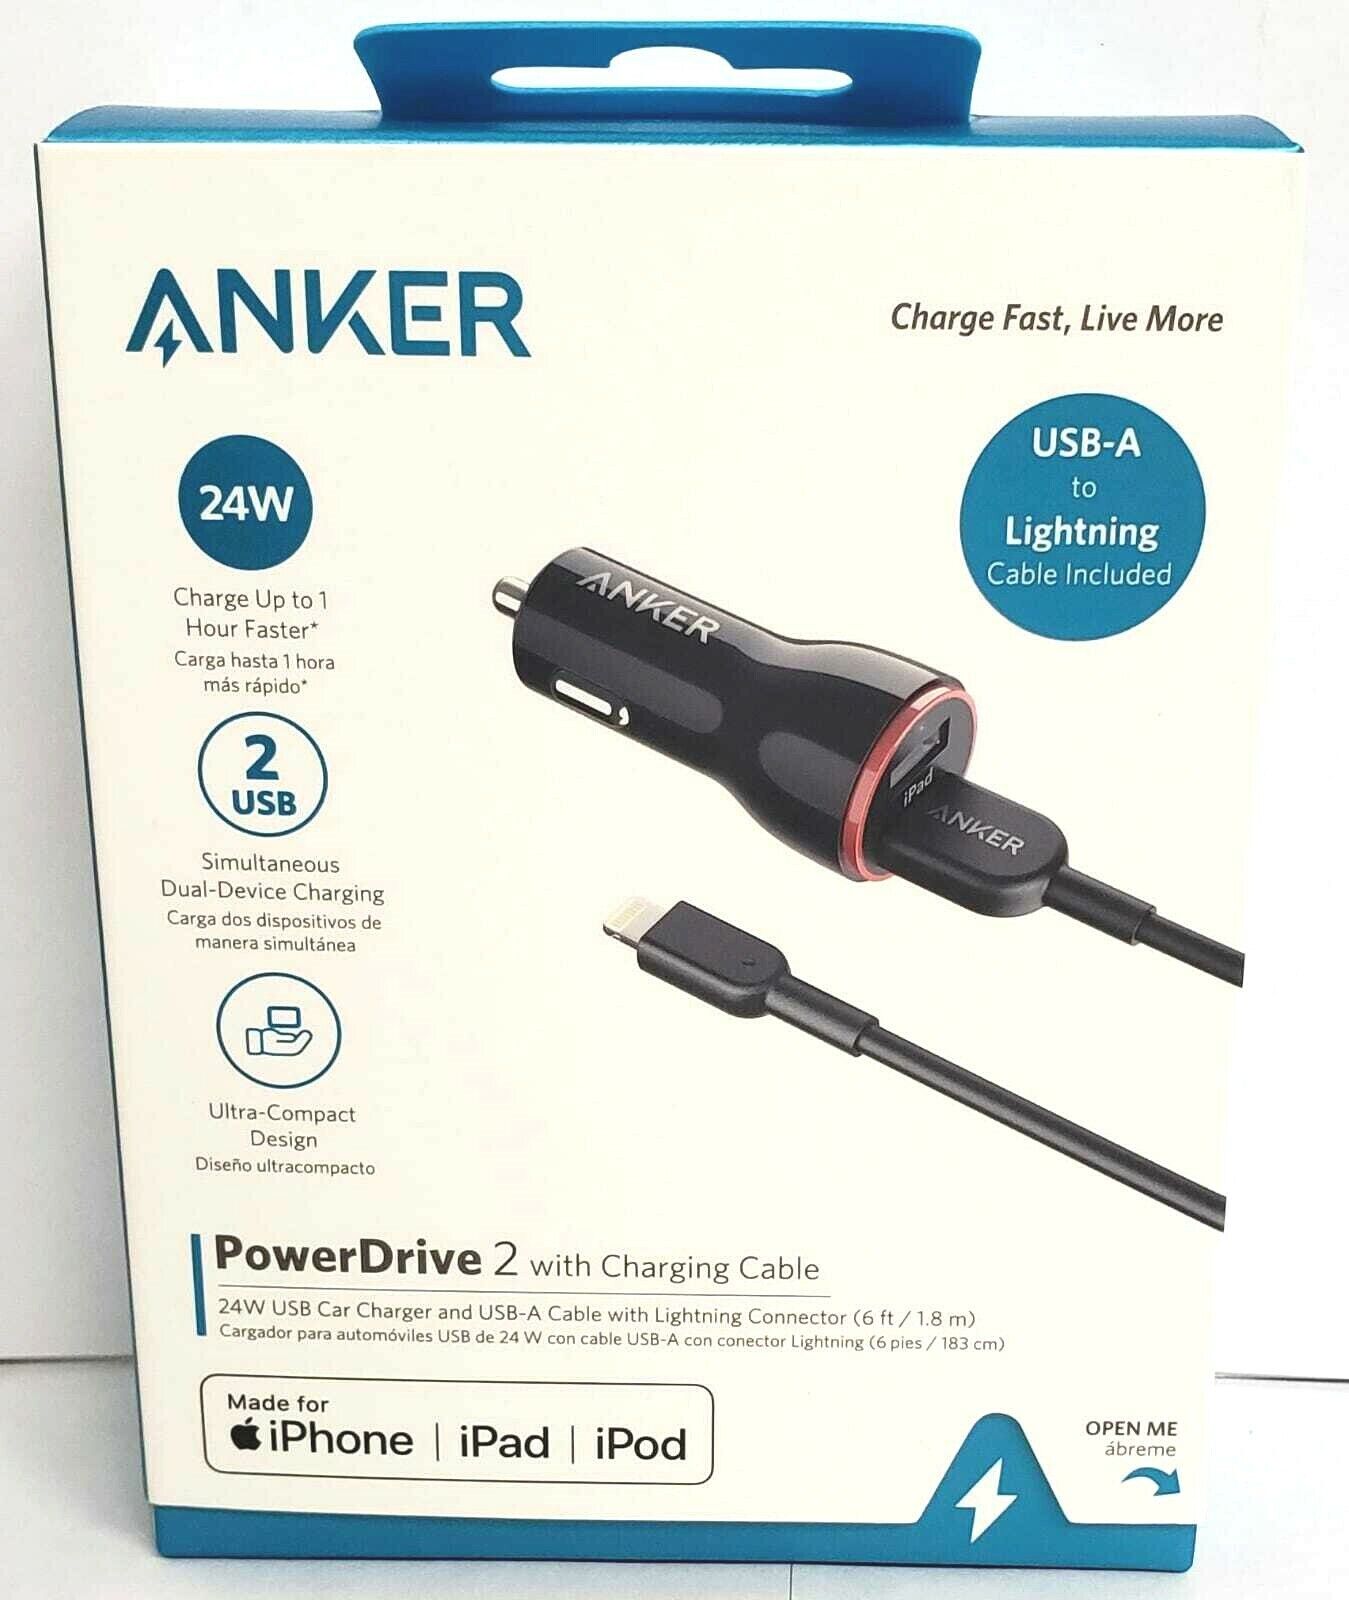 ANKER PowerDrive 24W 2 port with 6FT USB-A - Lightning Cable